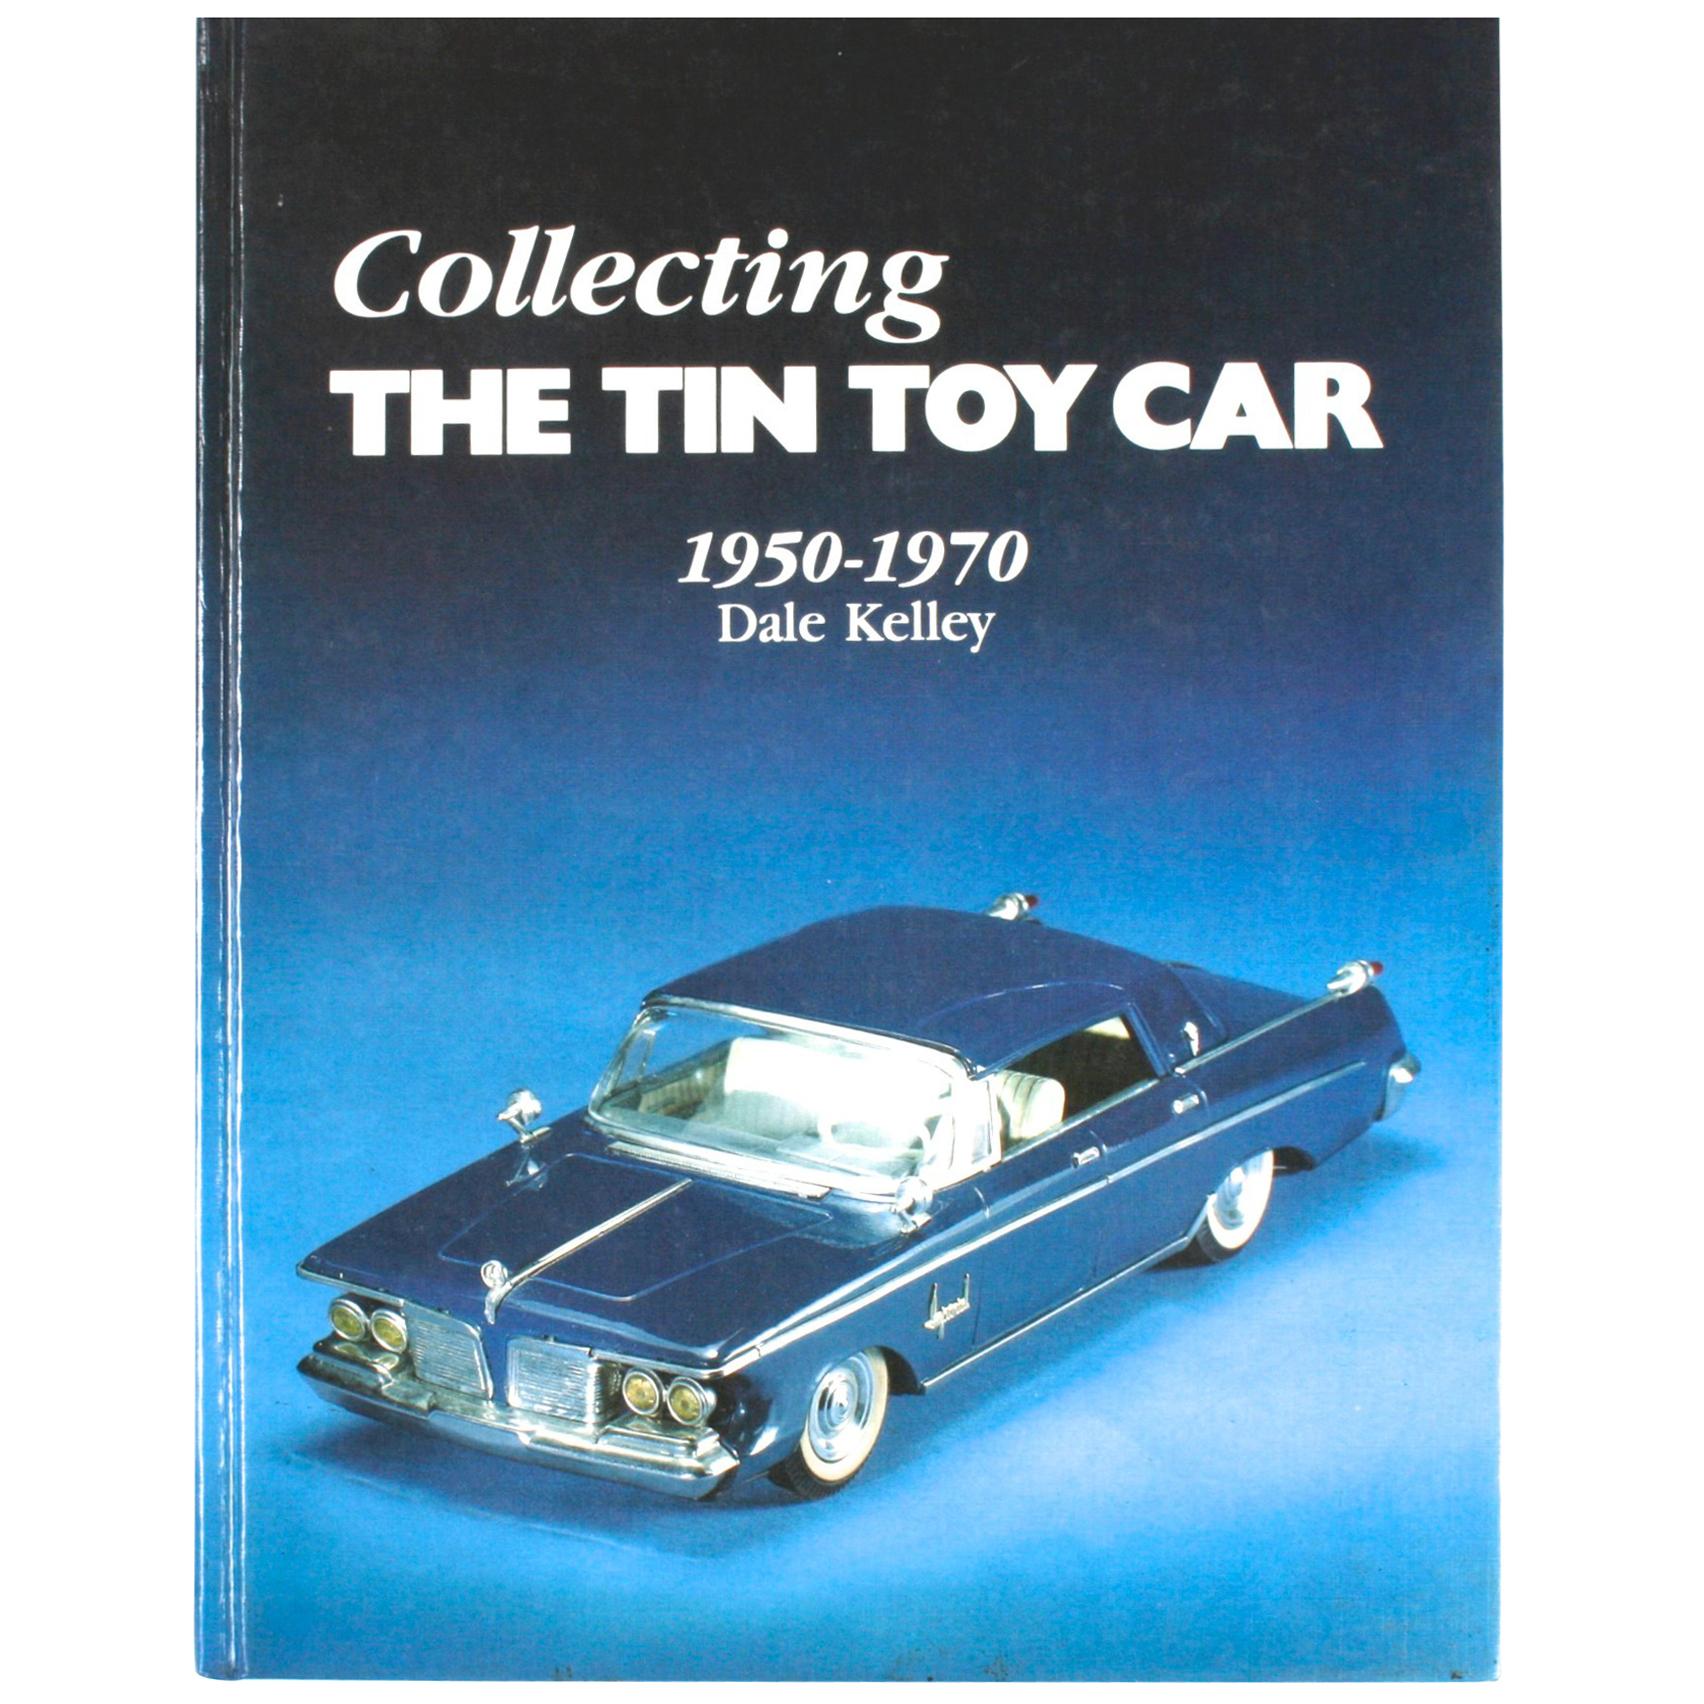 Collecting the Tin Toy Car, 1950-1970 by Dale Kelley, 1st Edition